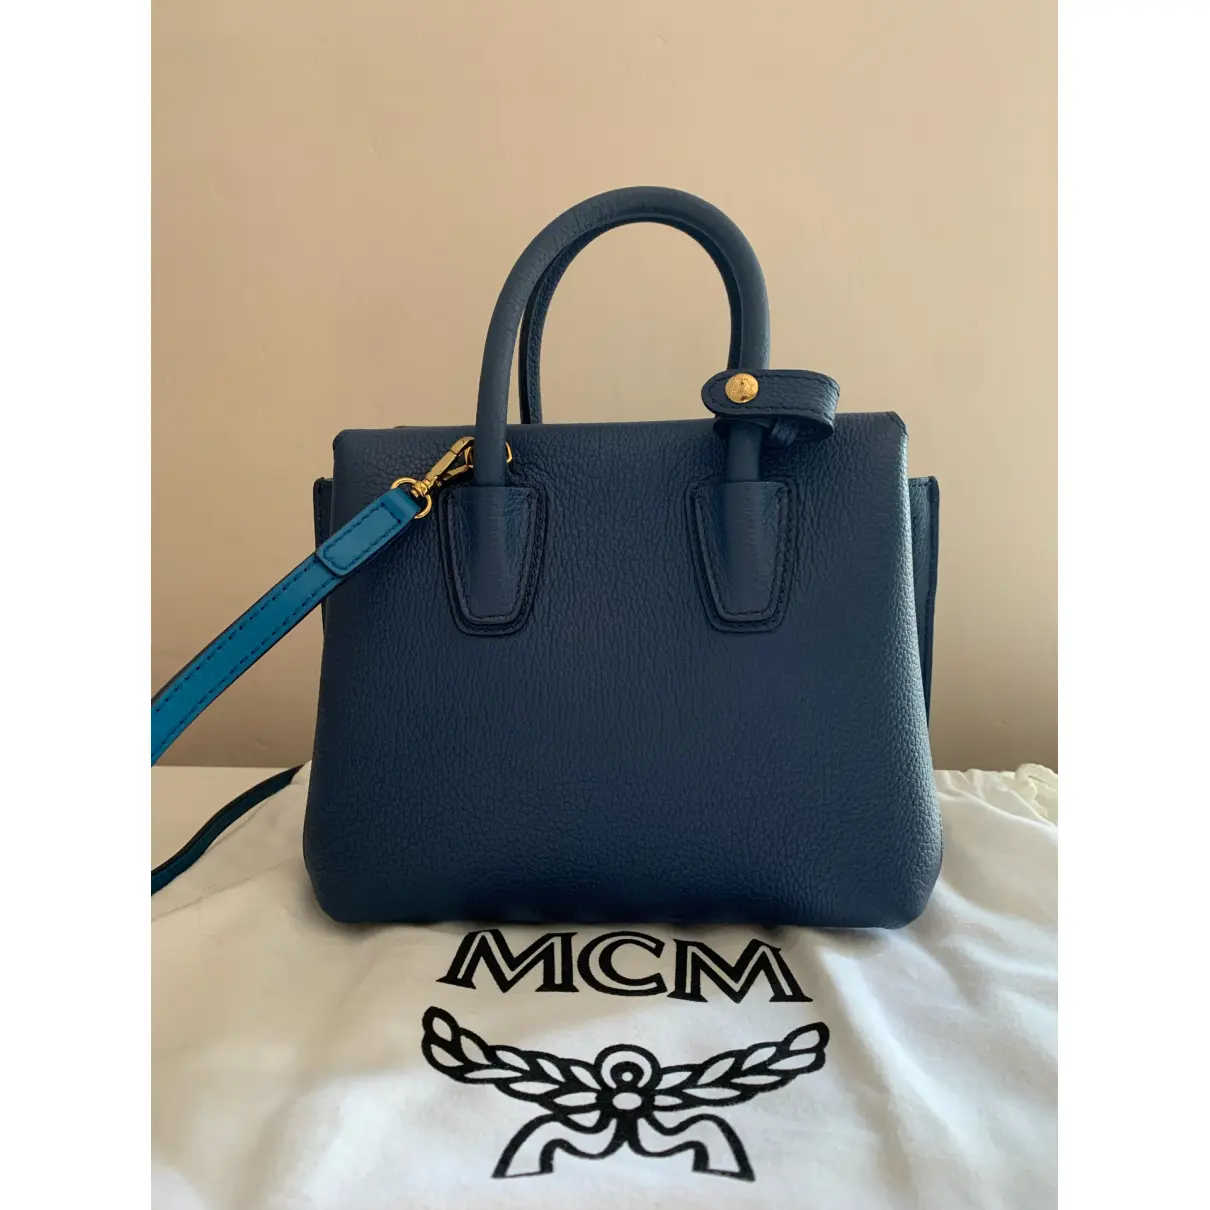 Buy MCM Milla leather tote online